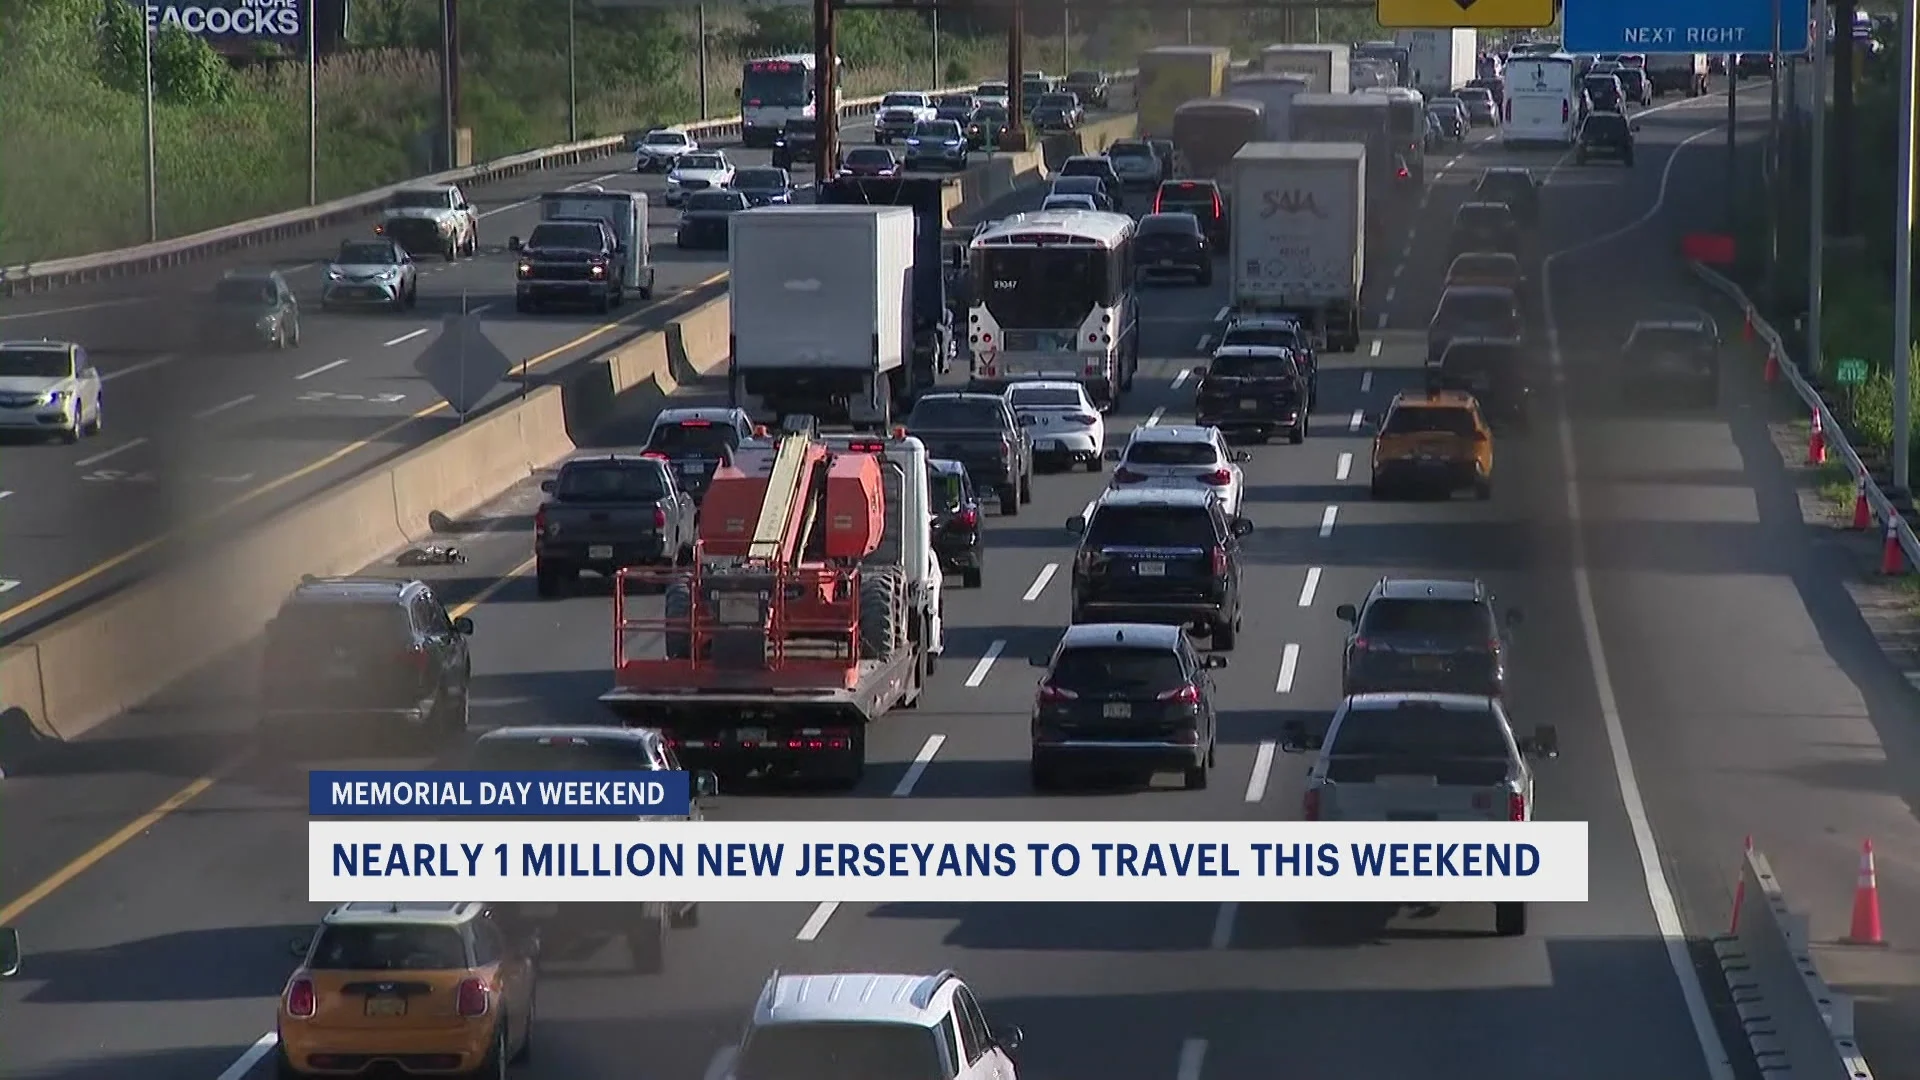 'This is unbelievable traffic.’ Memorial Day travelers share road trip blues